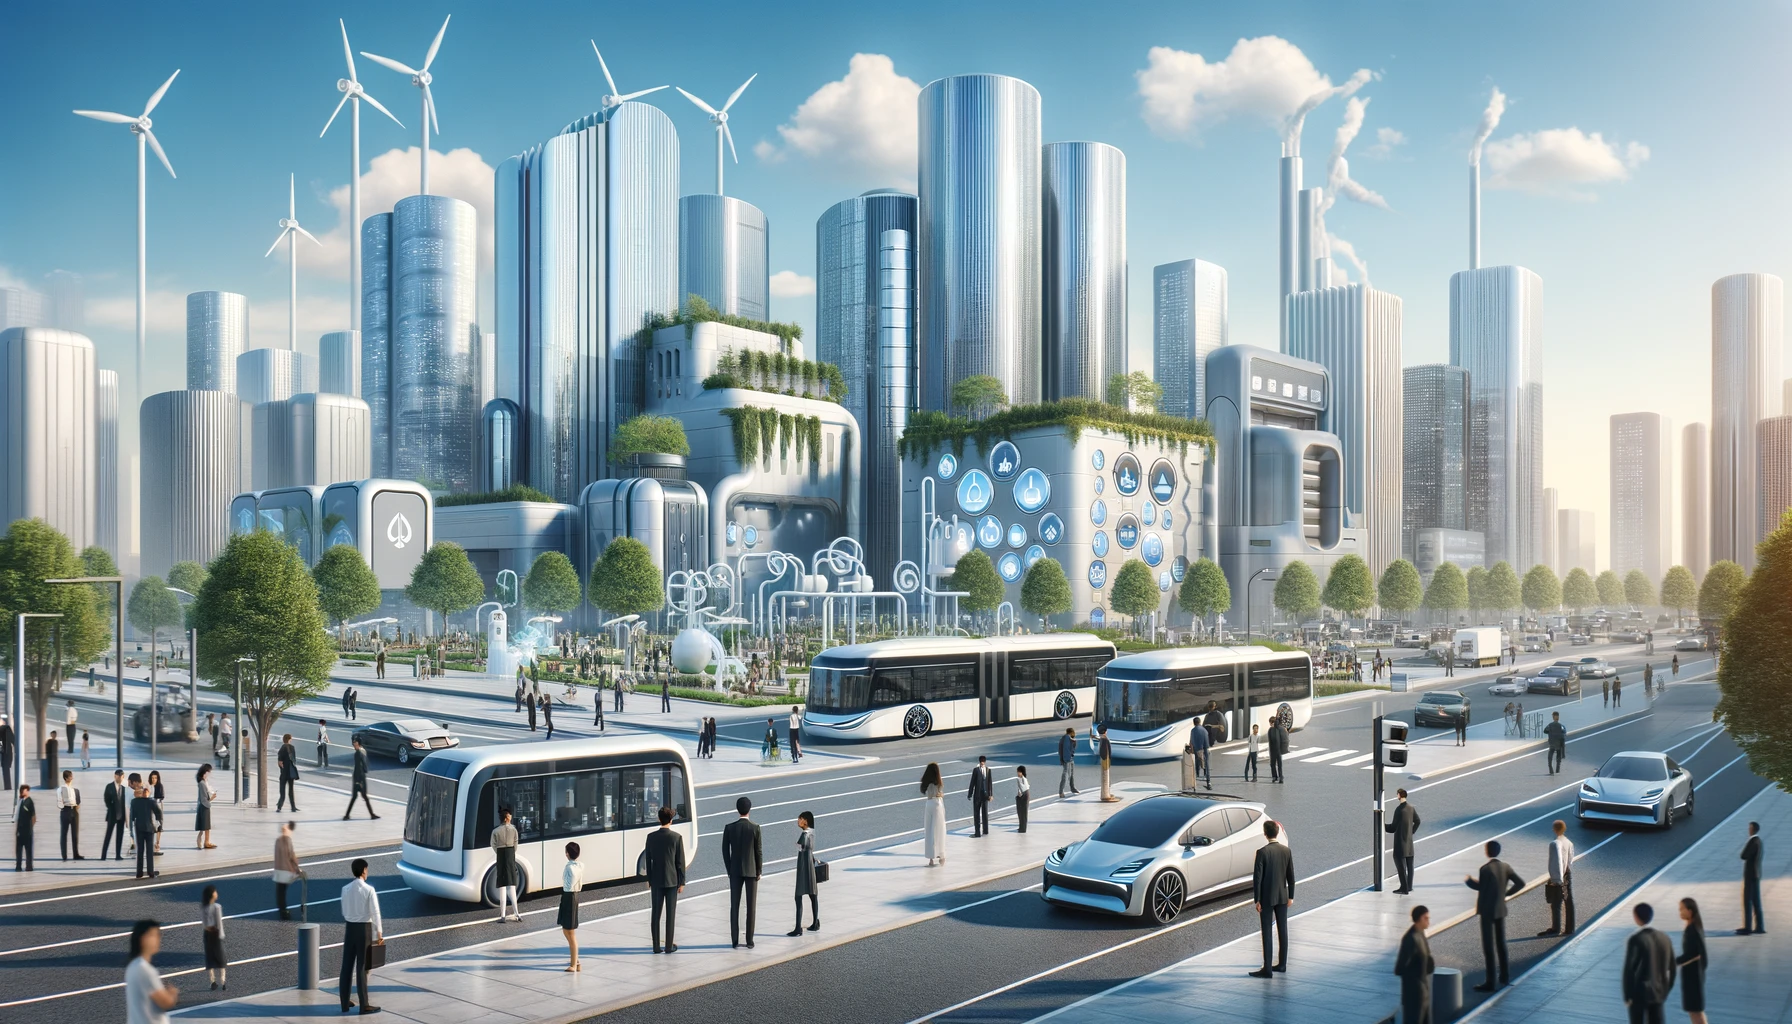 A futuristic city utilizing hydrogen fuel technology for a sustainable, clean environment.